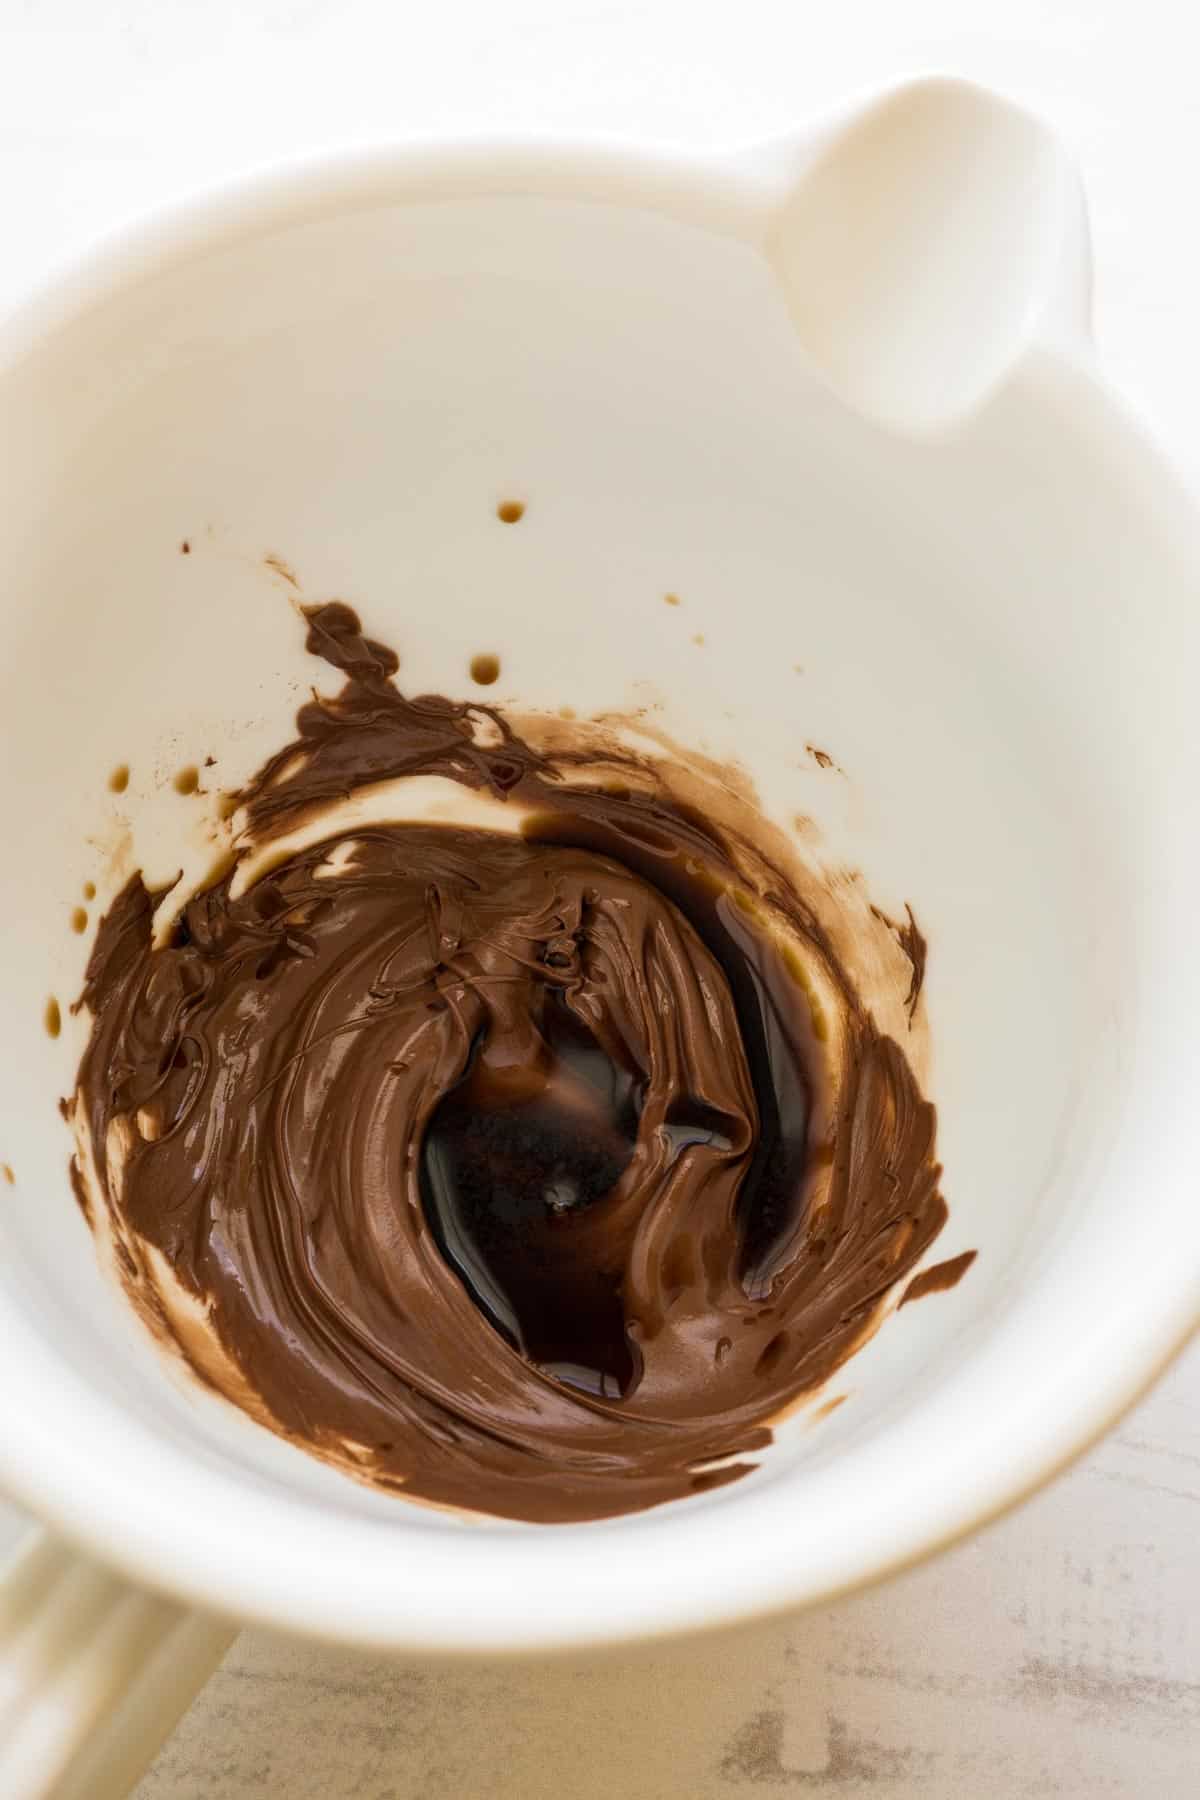 Melted chocolate and vanilla in a white mixing bowl.